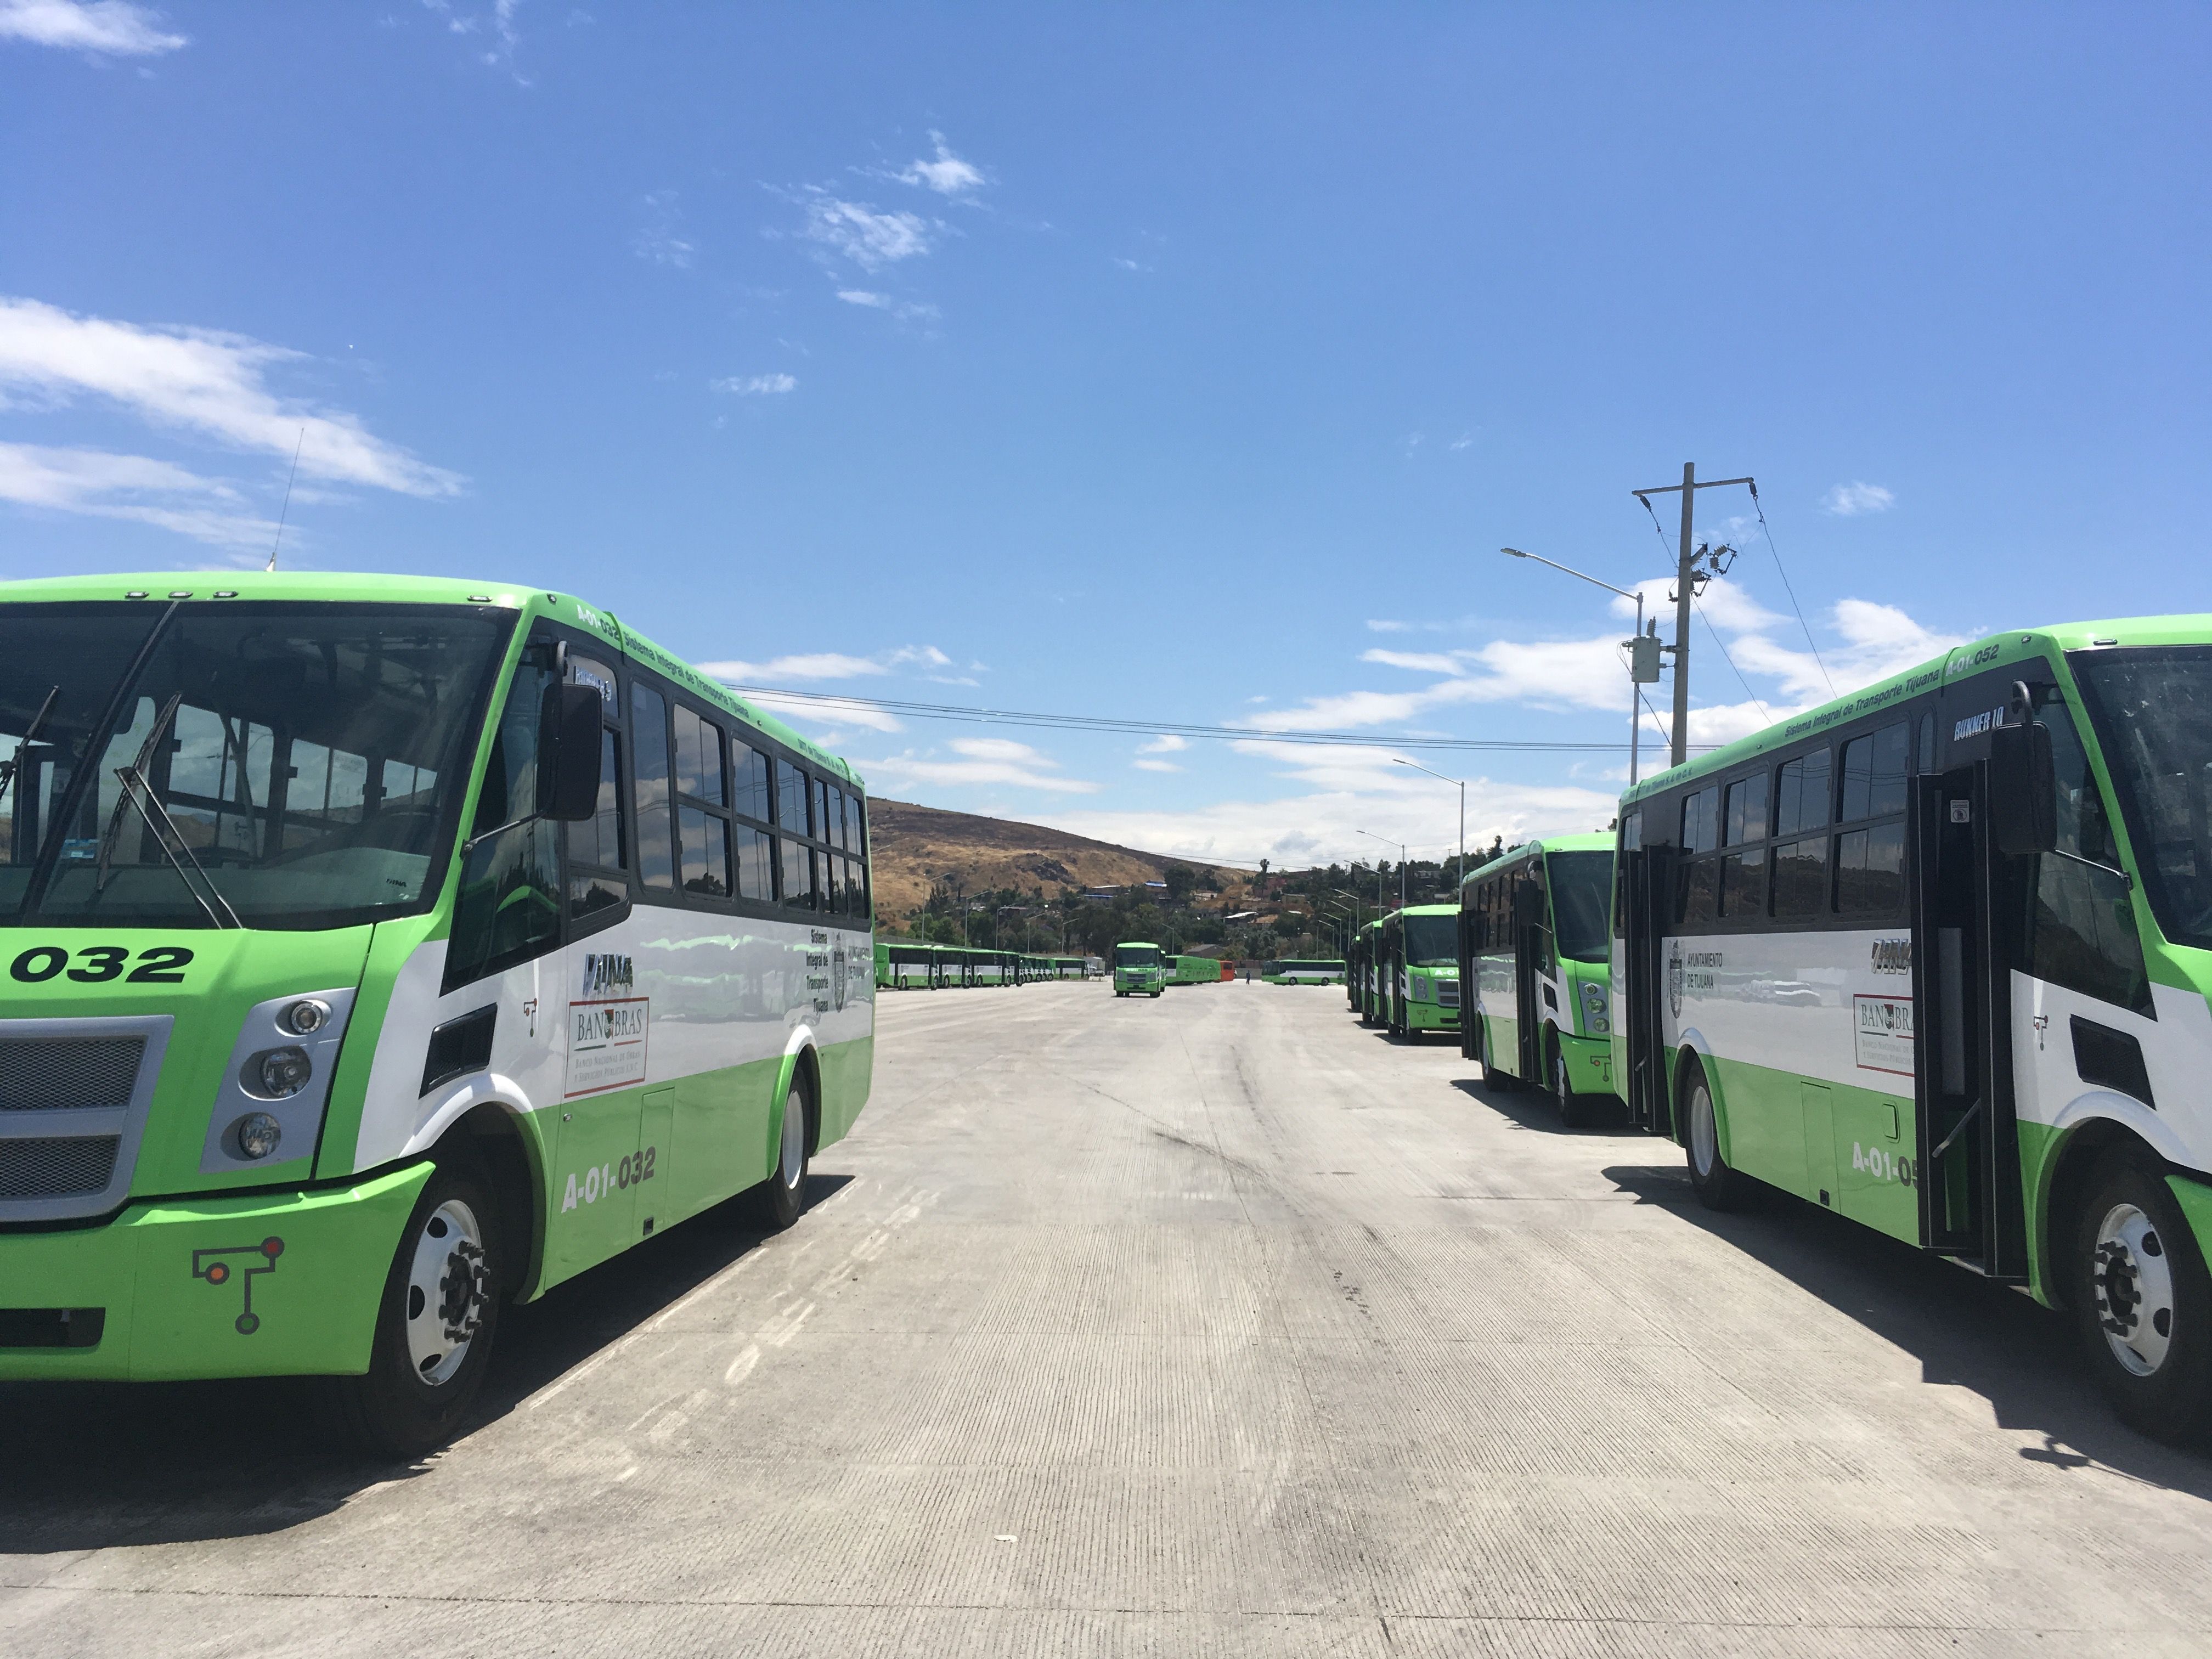 Buses for the SITT's rutas alimentadoras (feeder routes) lined up at the system's storage facility. Image by Patrick Reilly. Mexico, 2017.